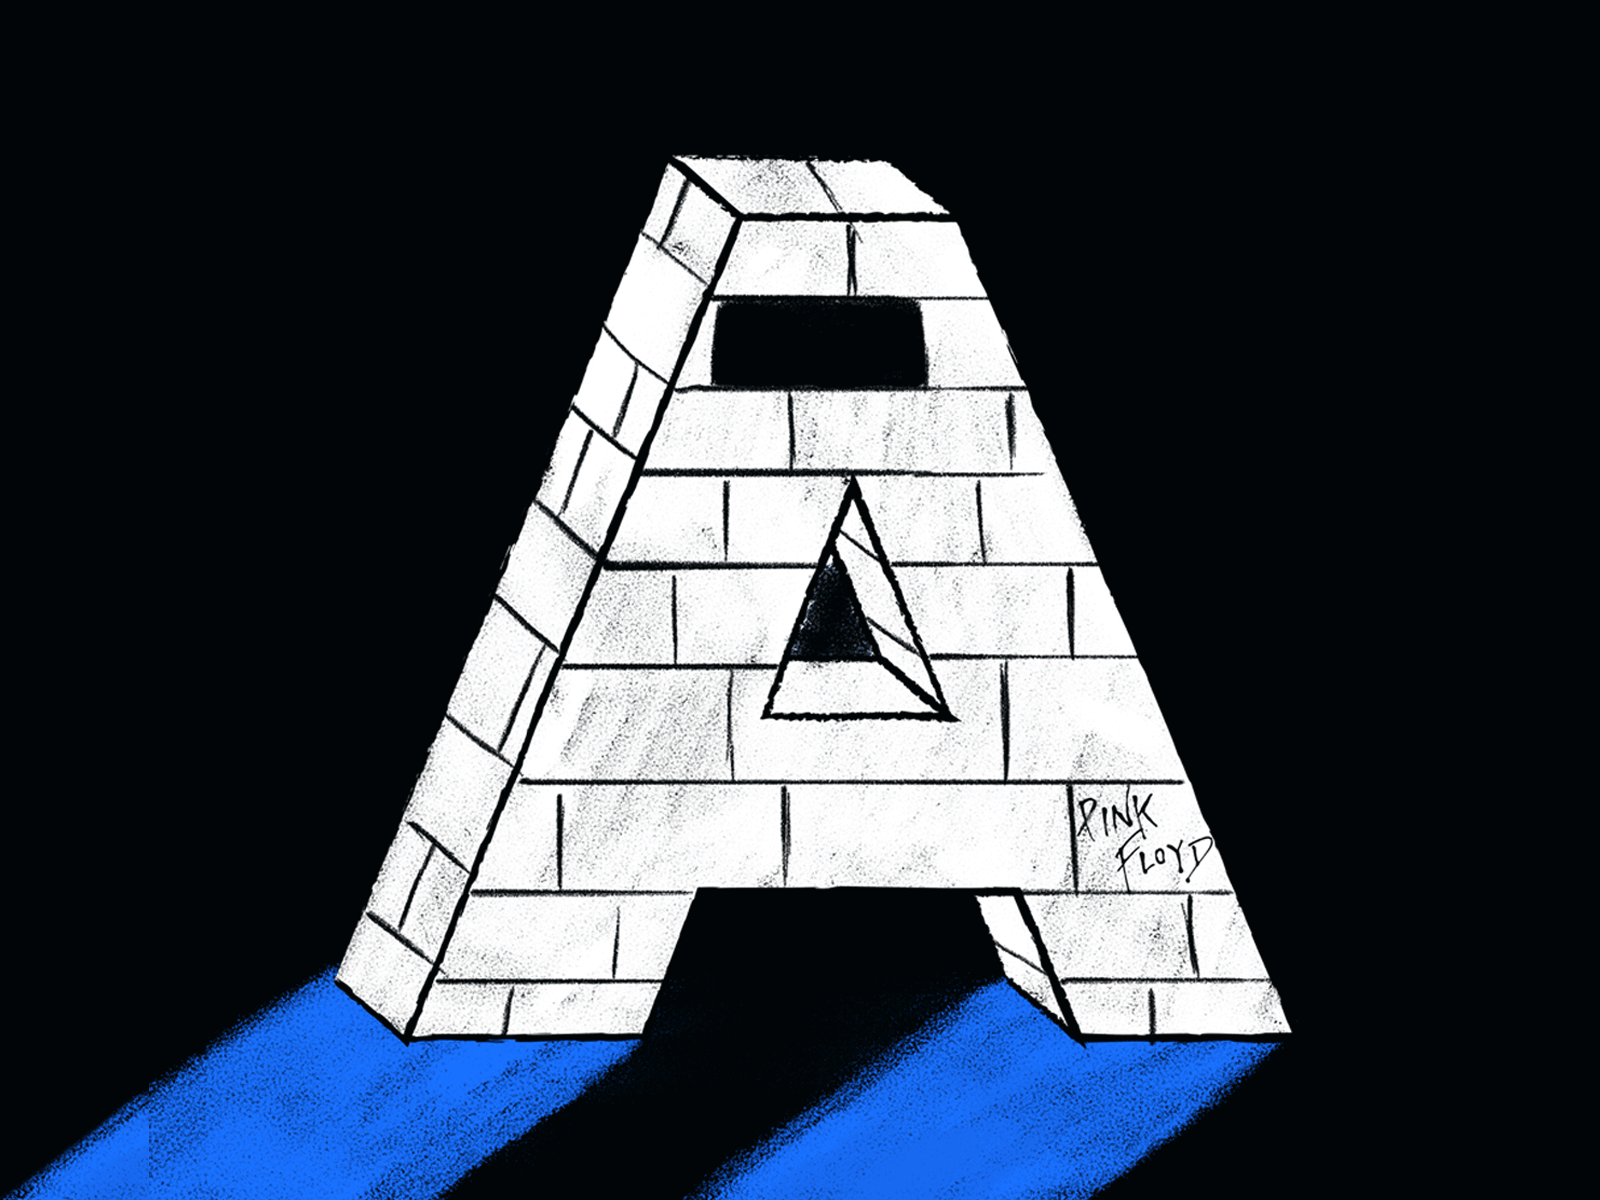 Letter A for #36daysoftype 2d 36daysoftype animation another brick design frame by frame illustration motion pink floyd the wall